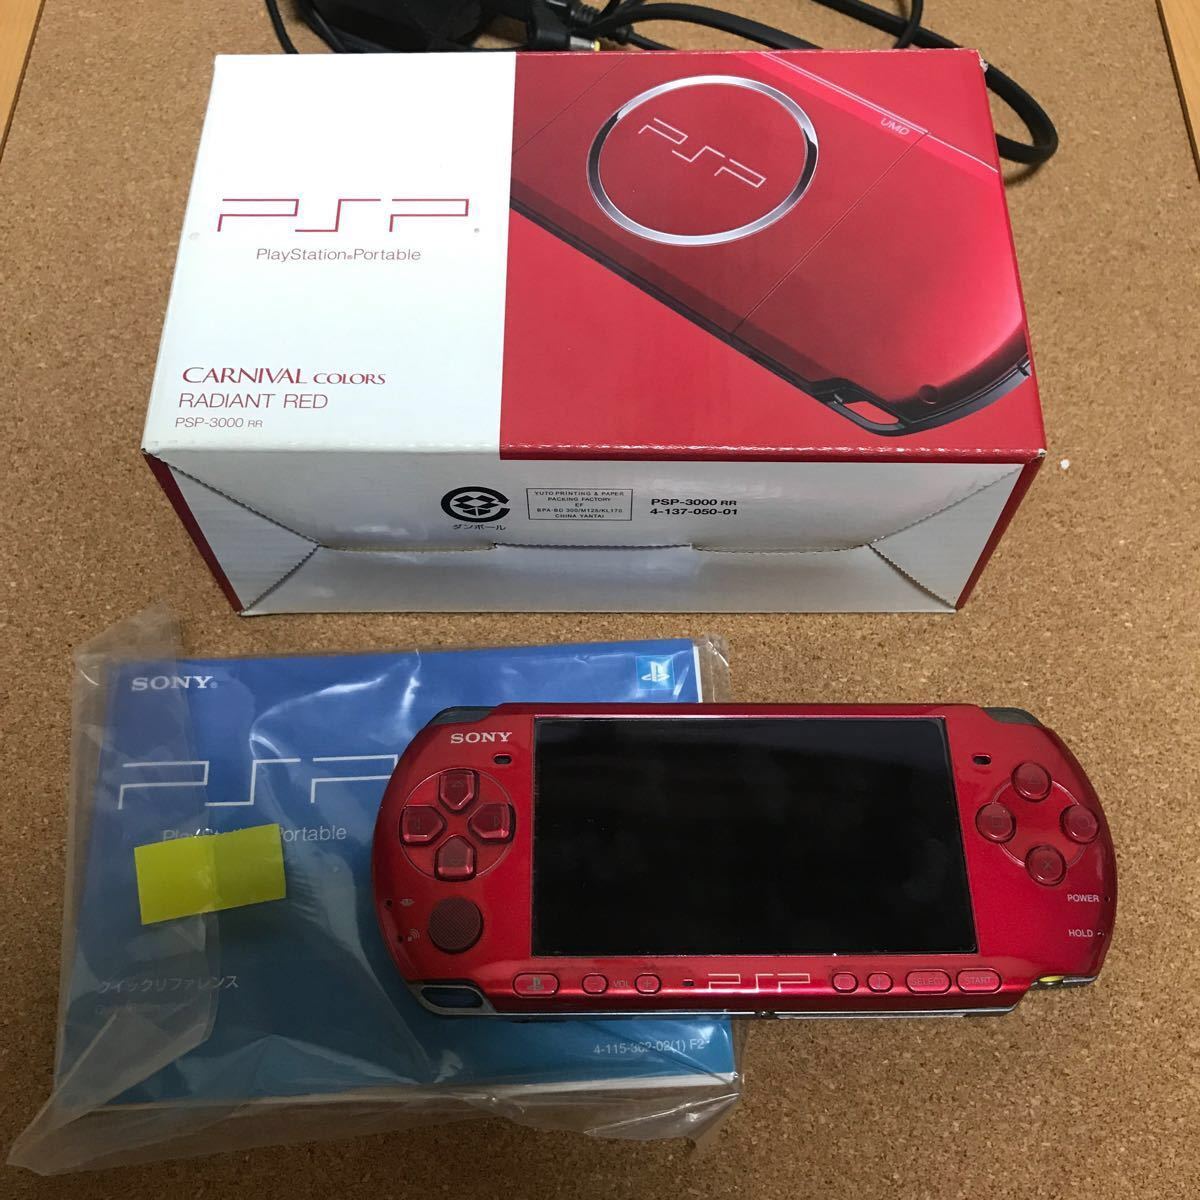 psp 3000 本体 ラディアントレッド 箱付き｜PayPayフリマ